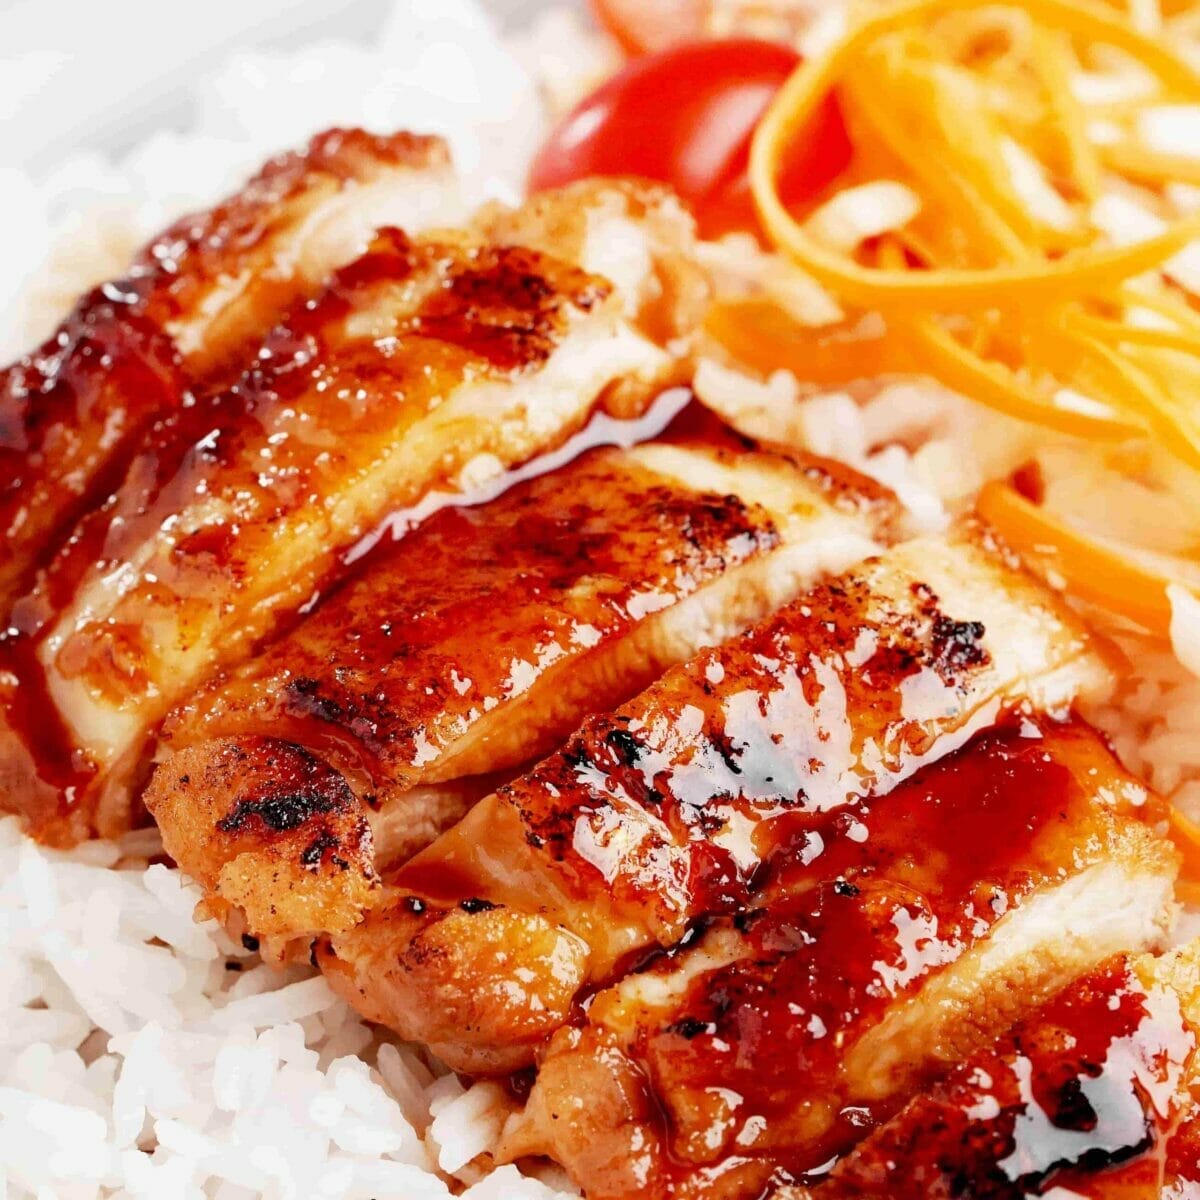 Homemade Delights Await: &Quot;Get Ready To Relish Chicken Teriyaki – Made With Love.&Quot;